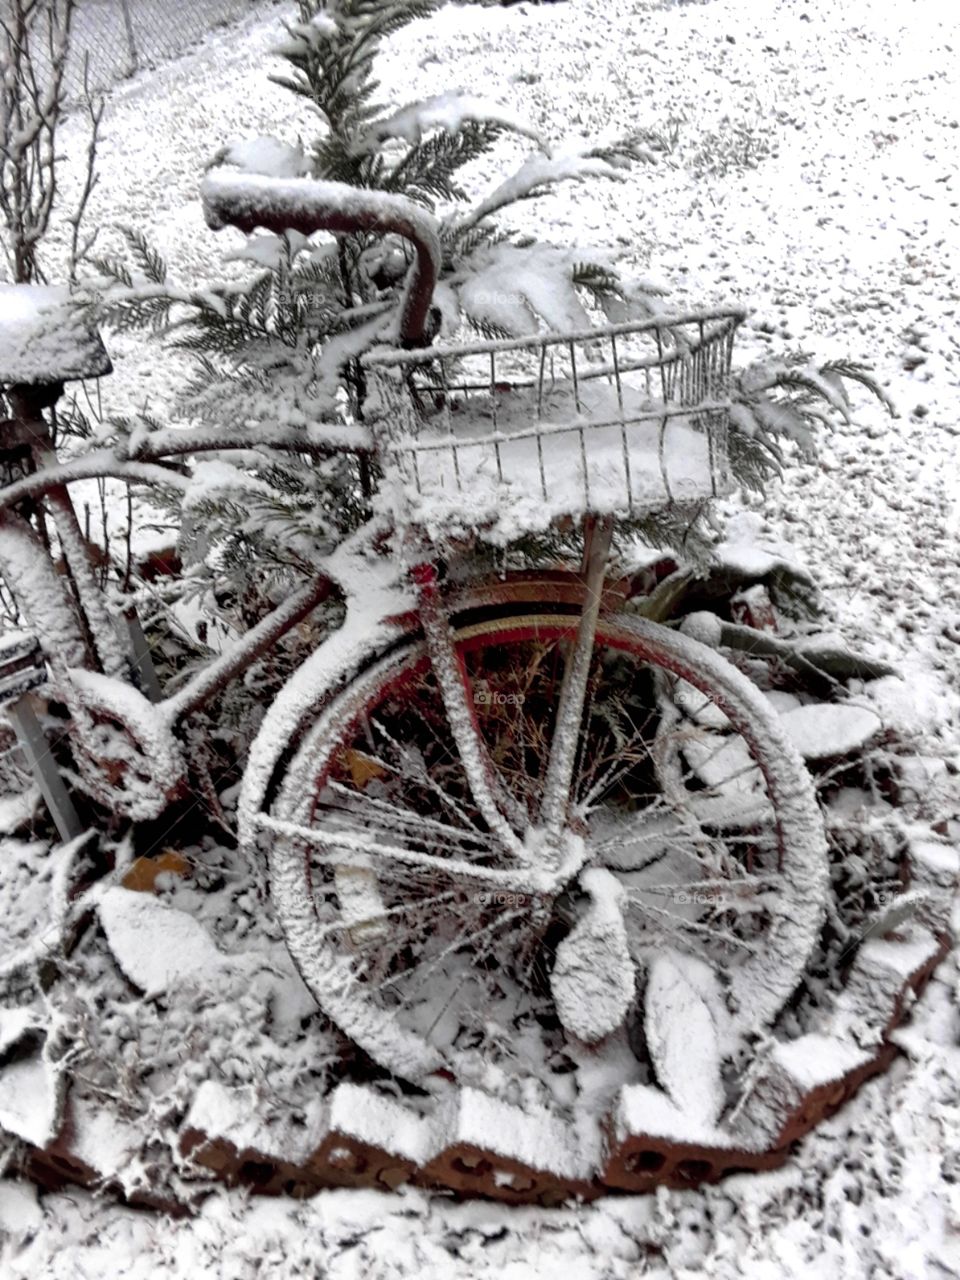 snow on old rusted bicycle with plants